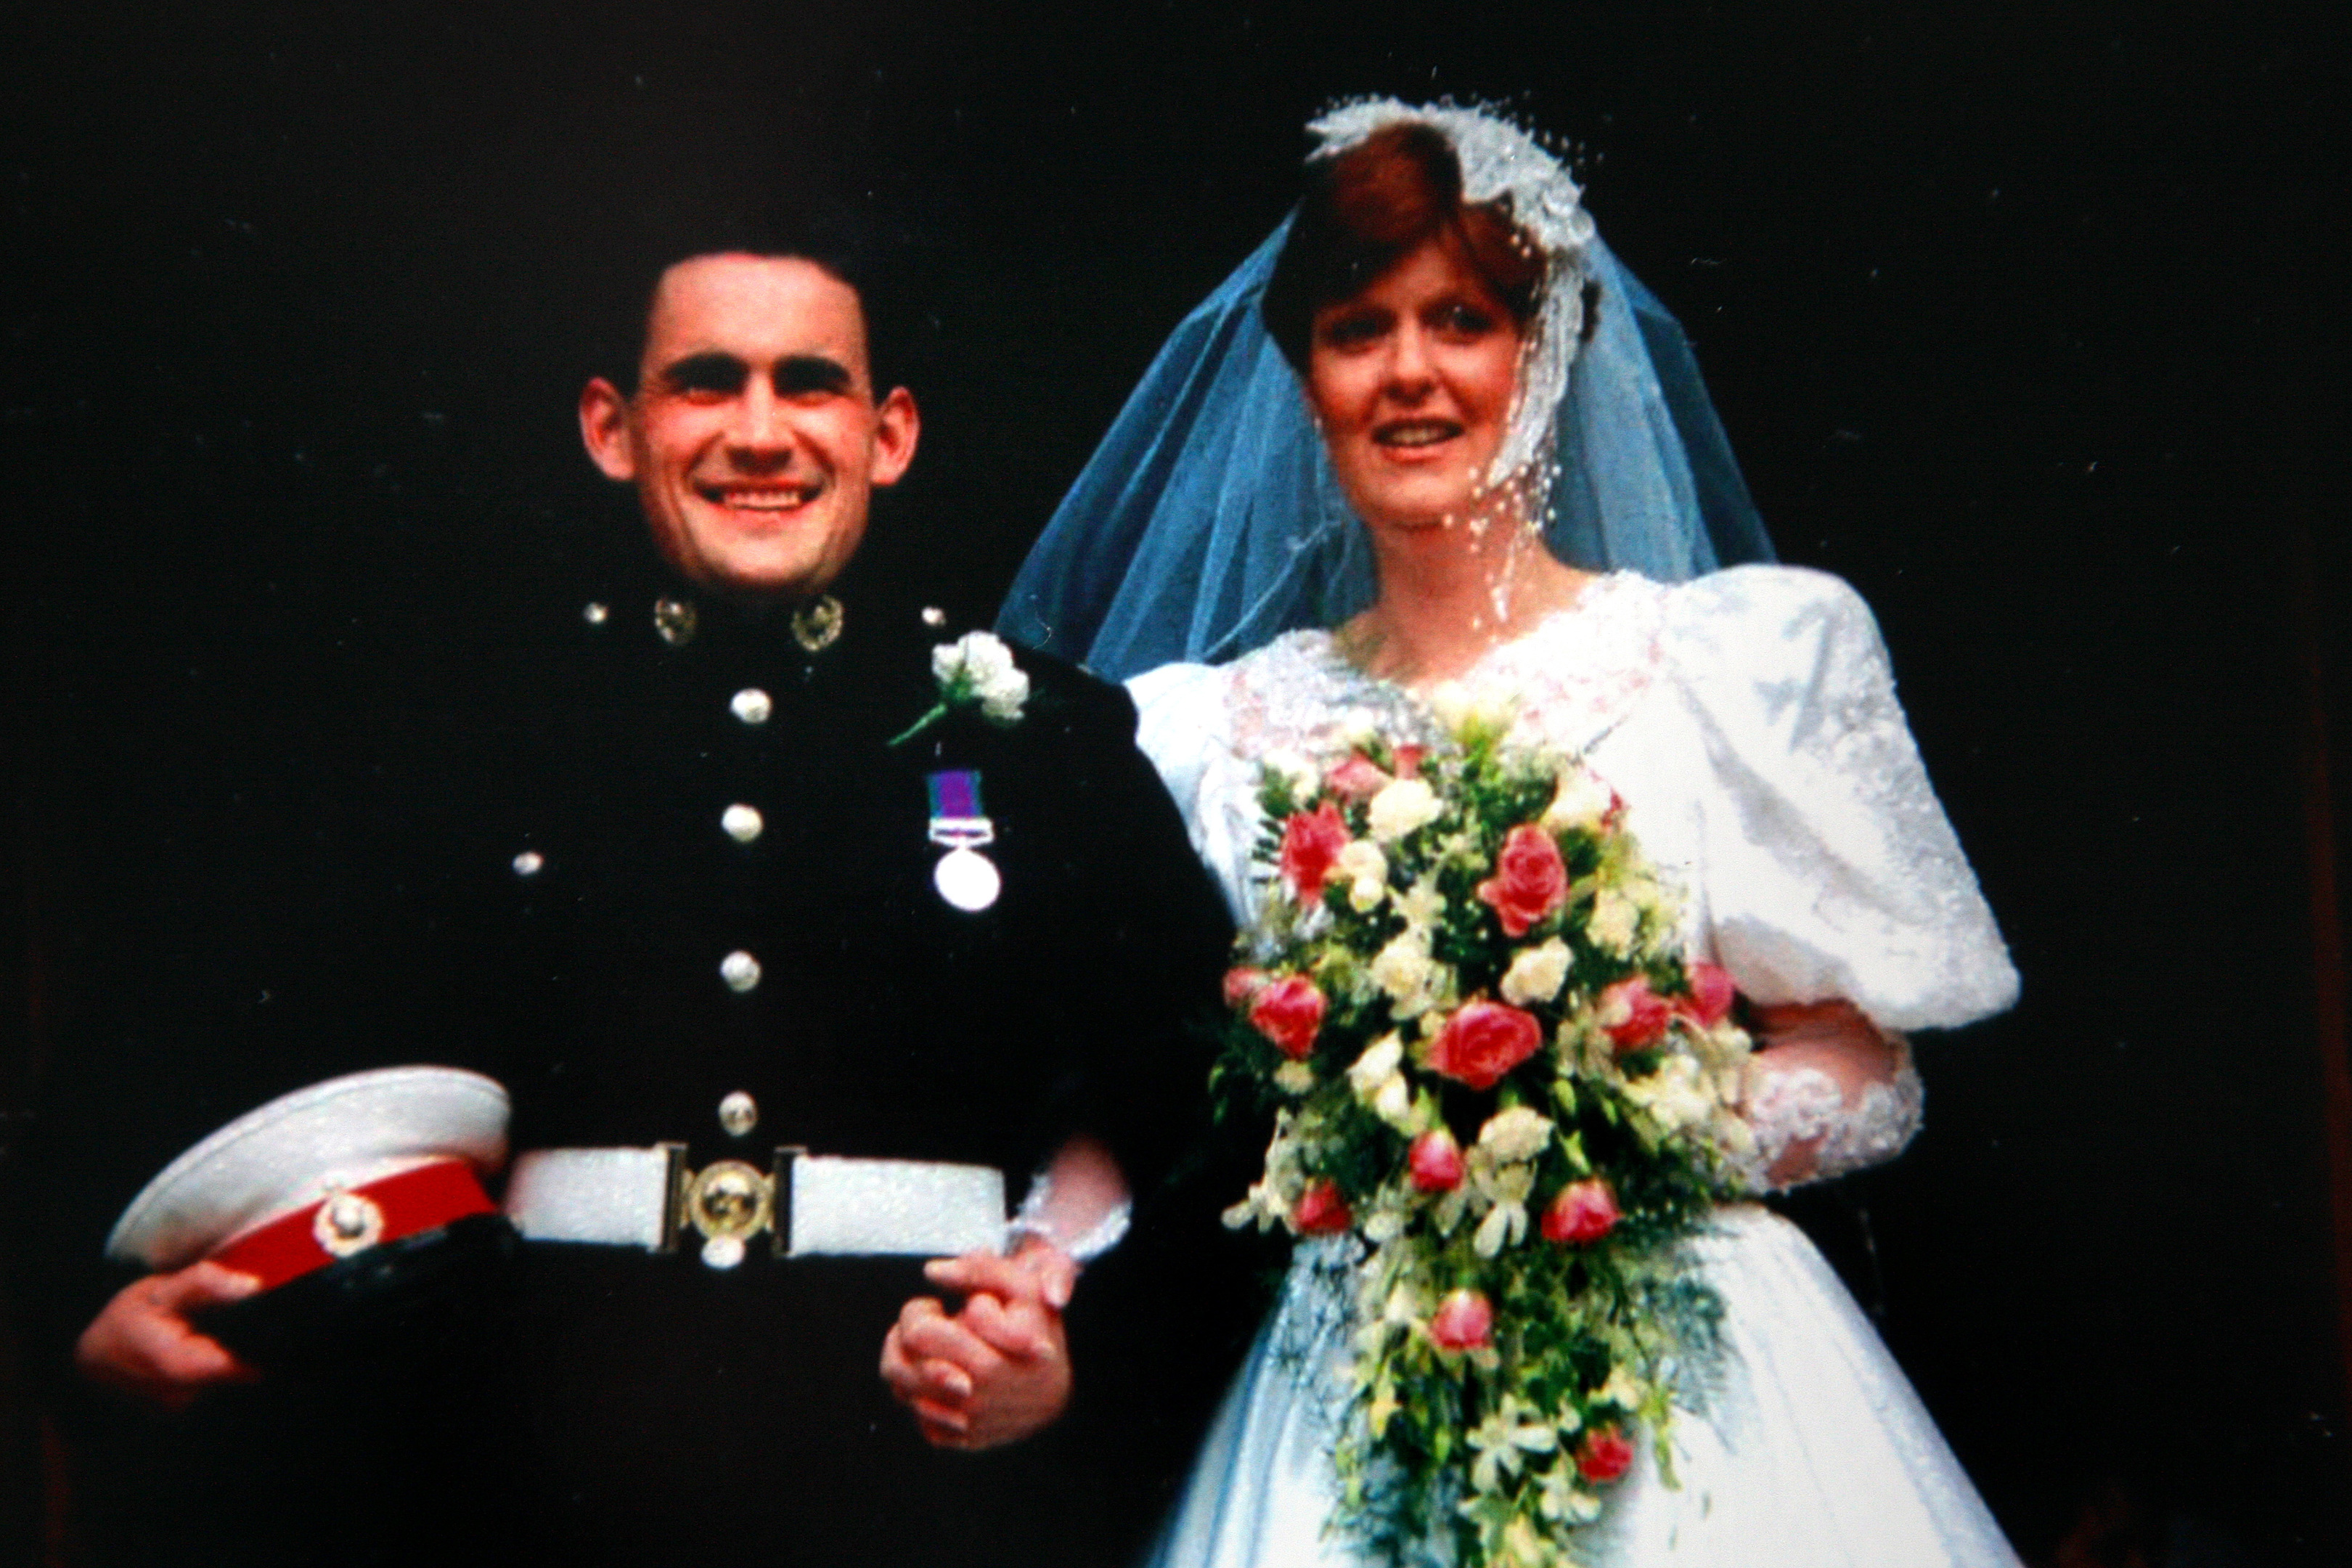 A photo from 1991 when Sheenagh and David Howard were married.